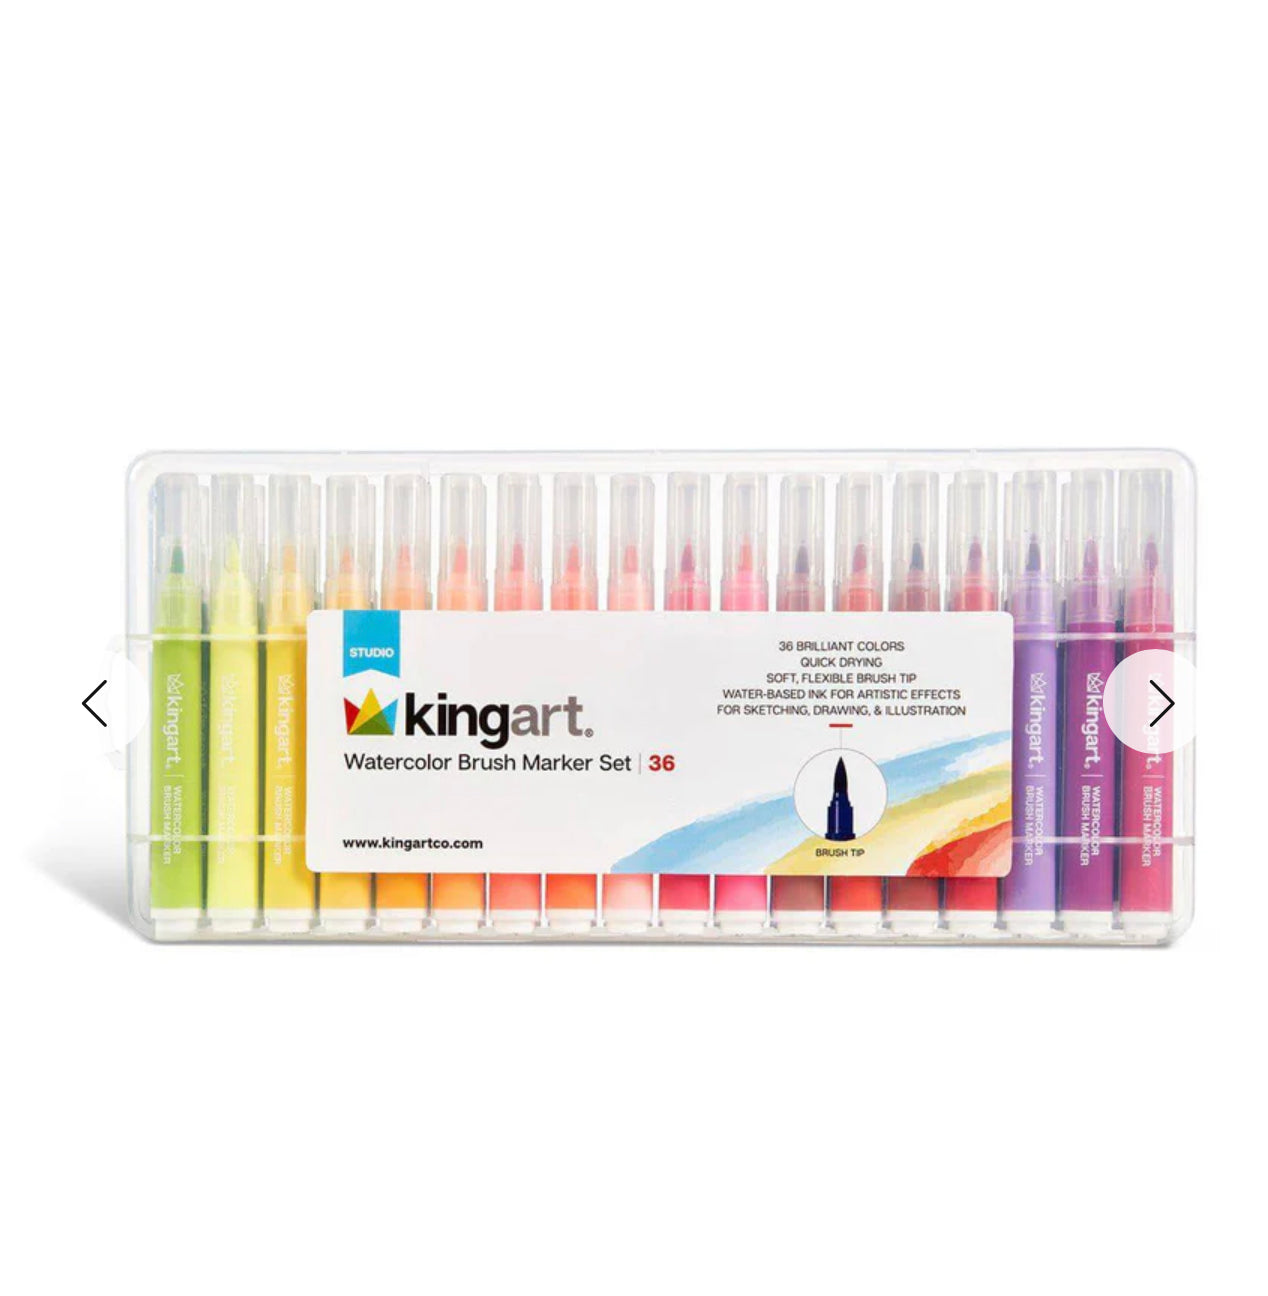 Studio King Art Watercolor Brush Markers Set of 36 With Case 